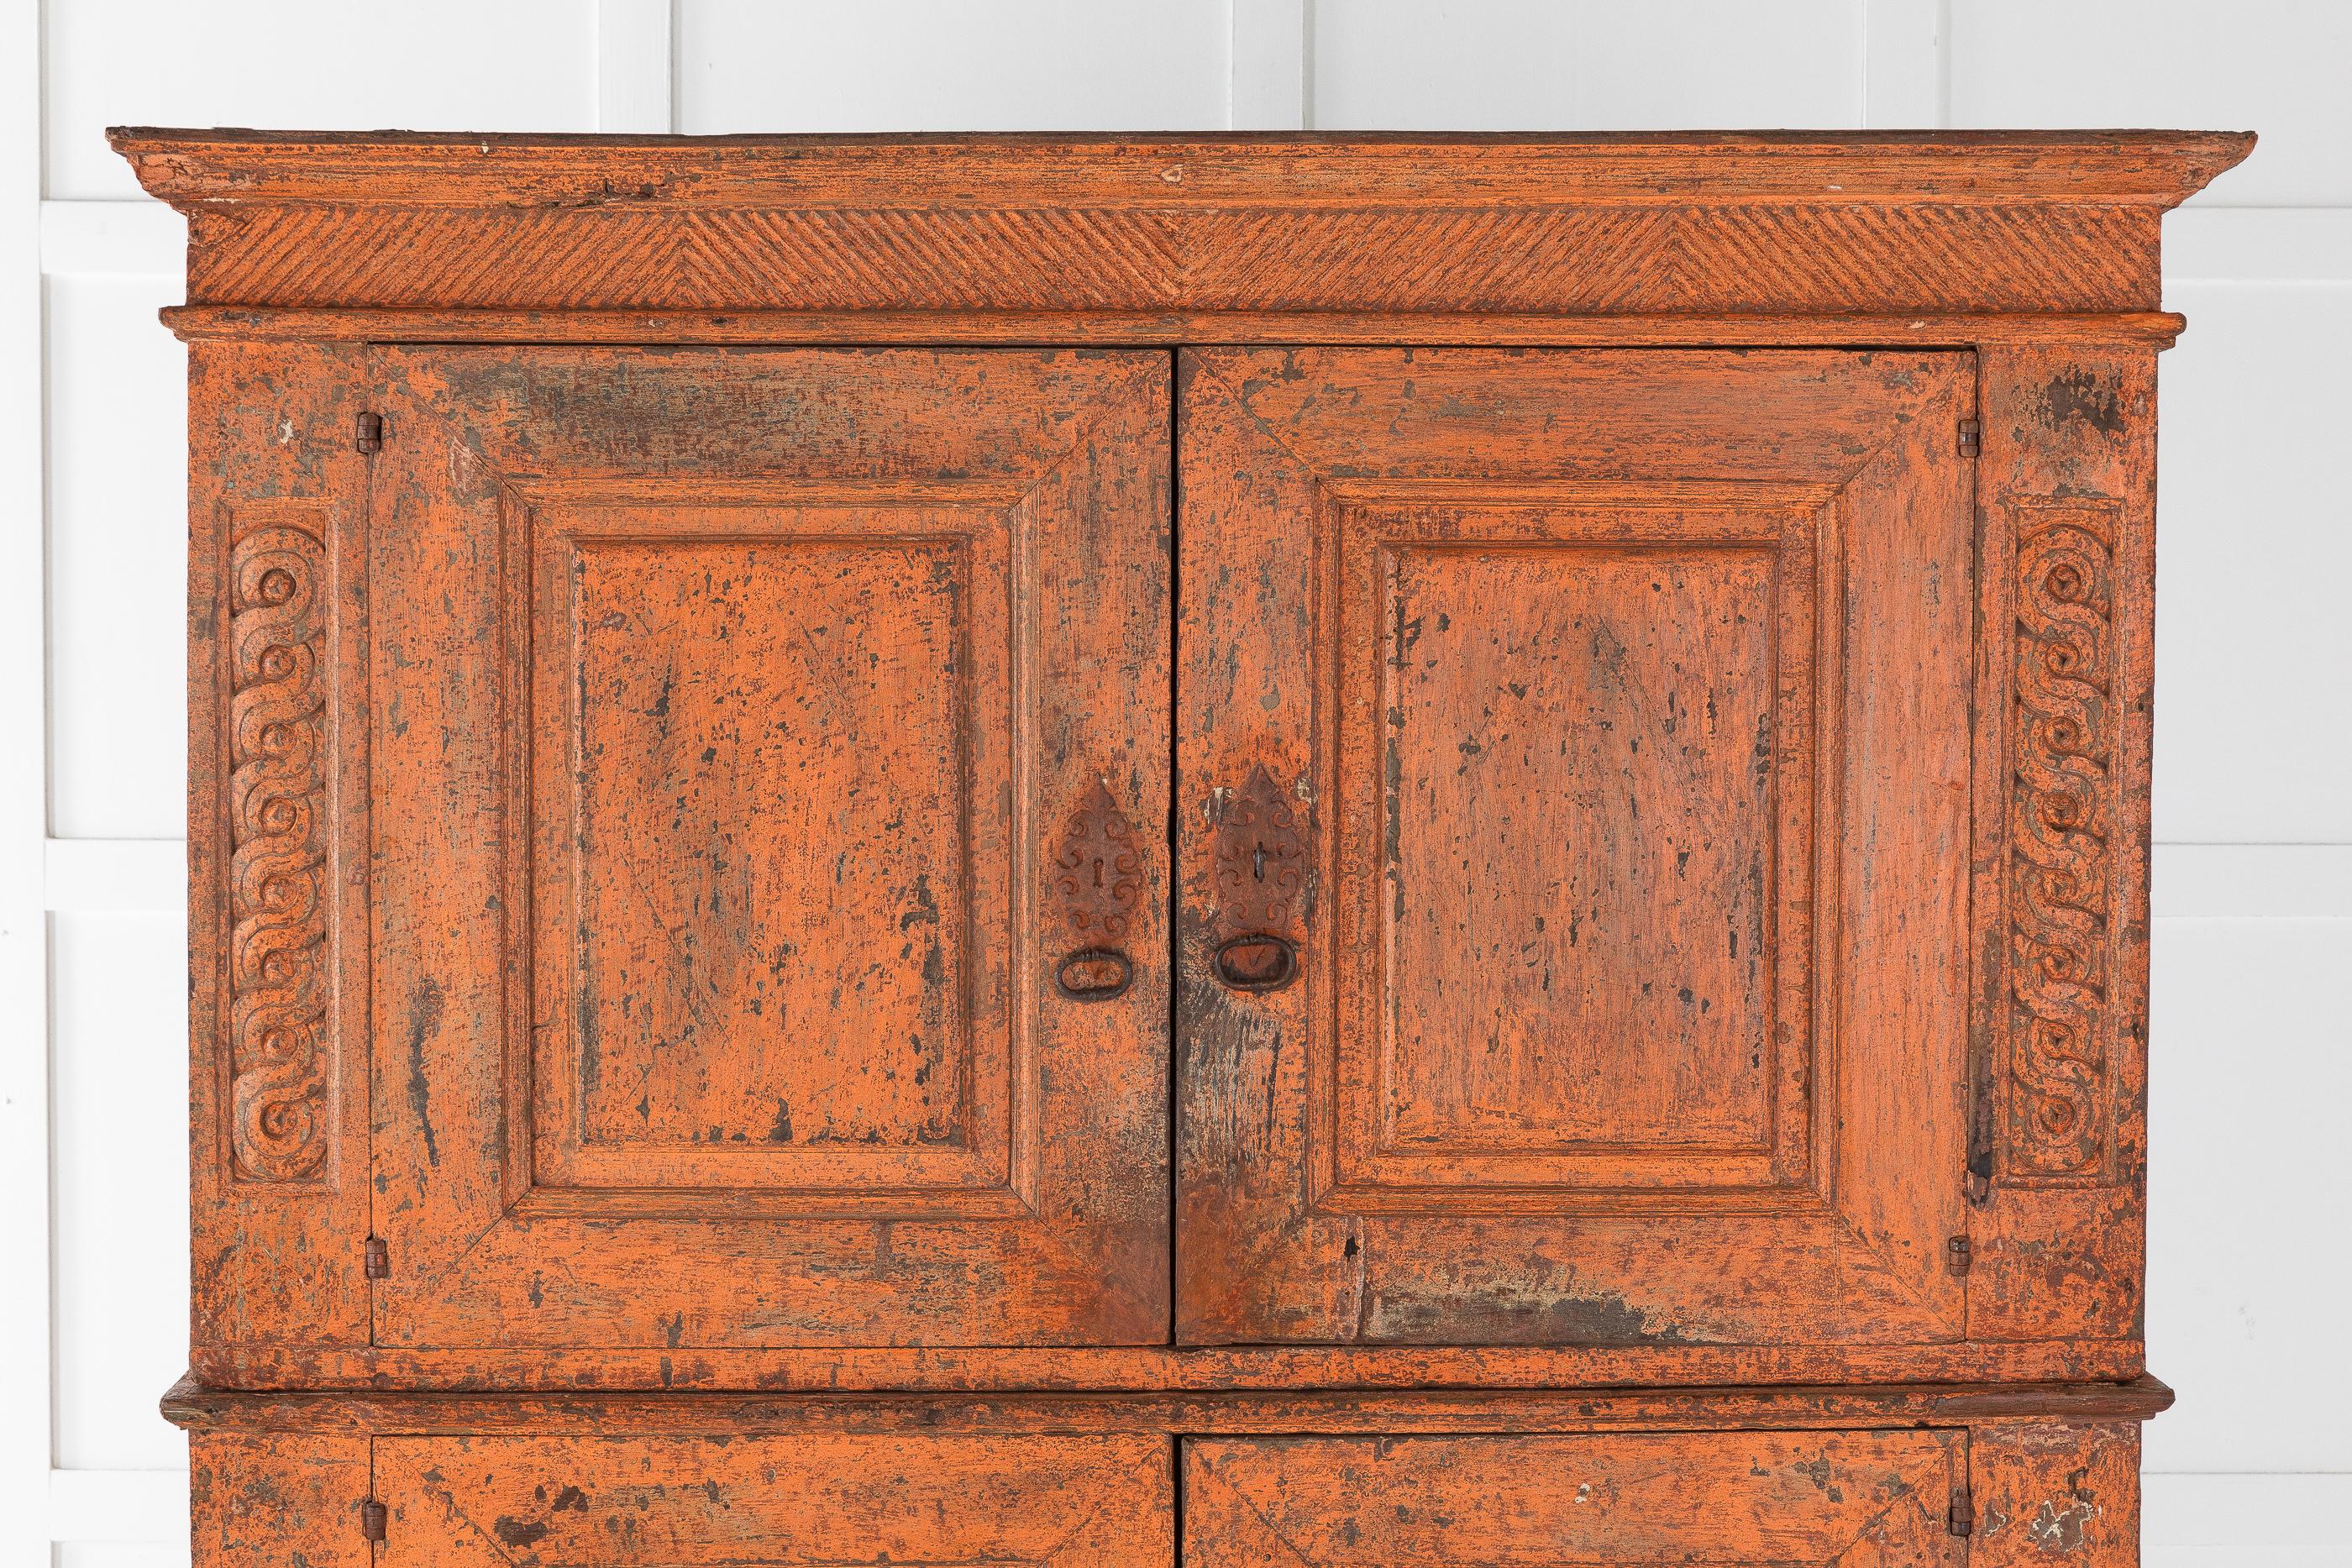 A rare find! 17th century Portuguese cabinet of small proportion.

We have carefully taken the 18th and 19th century paint off to reveal the original 17th century paint.

This cabinet has four doors, with a simple carved pattern, that open into